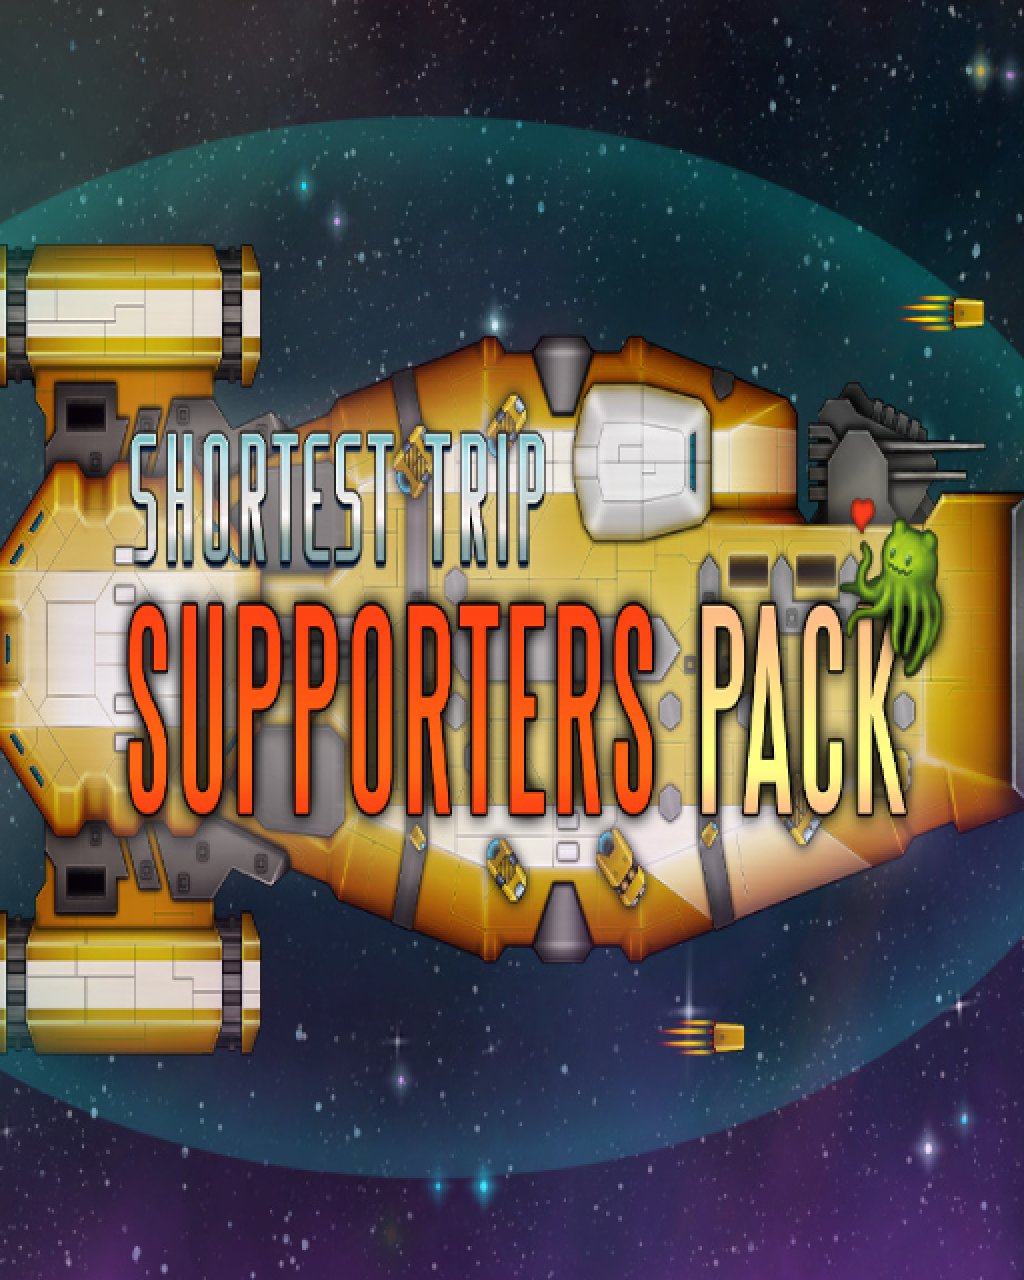 Shortest Trip to Earth Supporters Pack